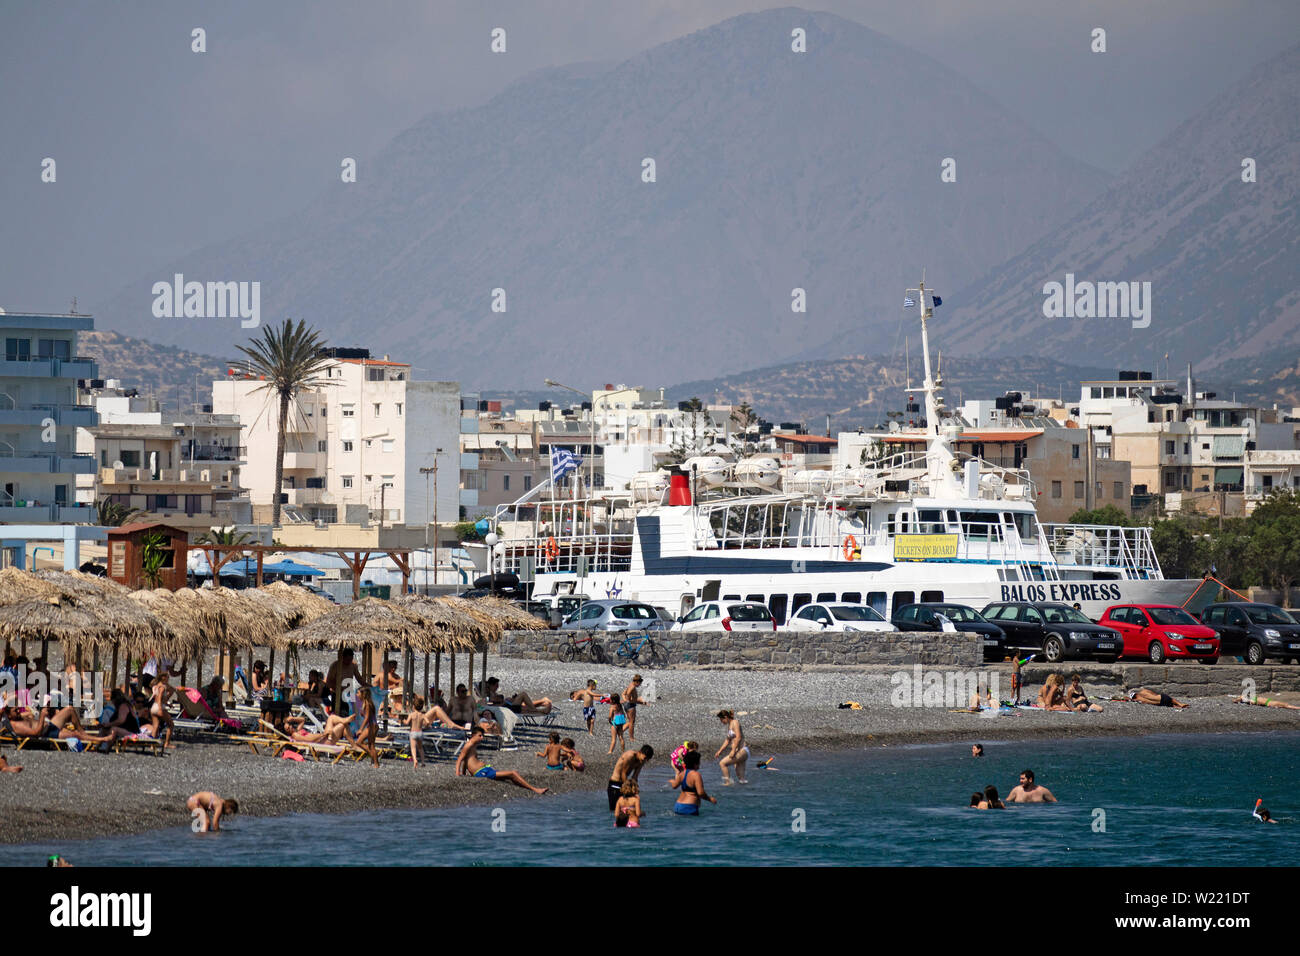 Ierapetra, Crete, Greece. June 2019. The southern coastal town of Ierapetra with holidaymakers on the beach and a Chrissi Island ferry in port. Stock Photo